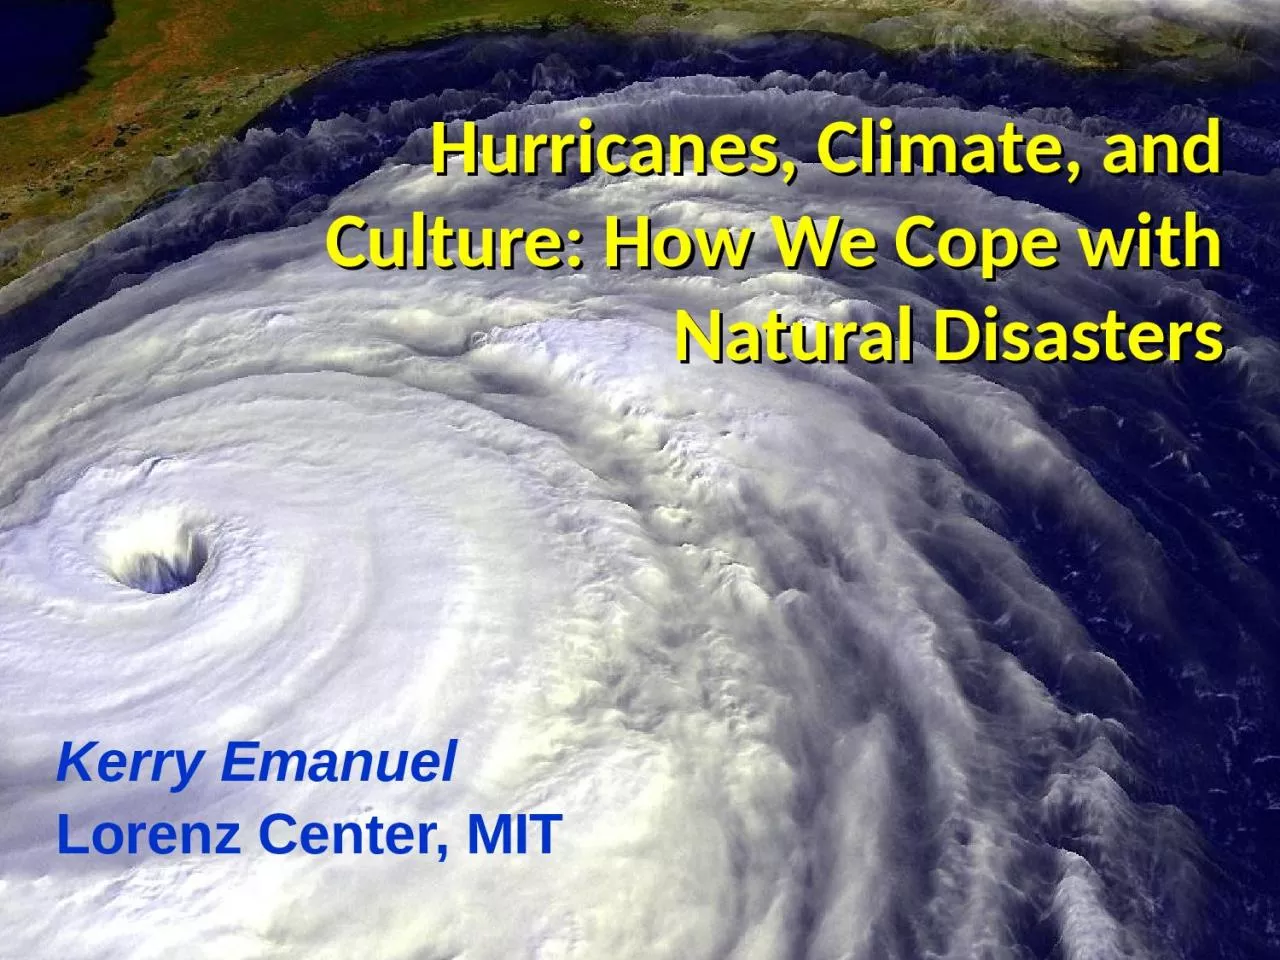 Hurricanes, Climate, and Culture: How We Cope with Natural Disasters